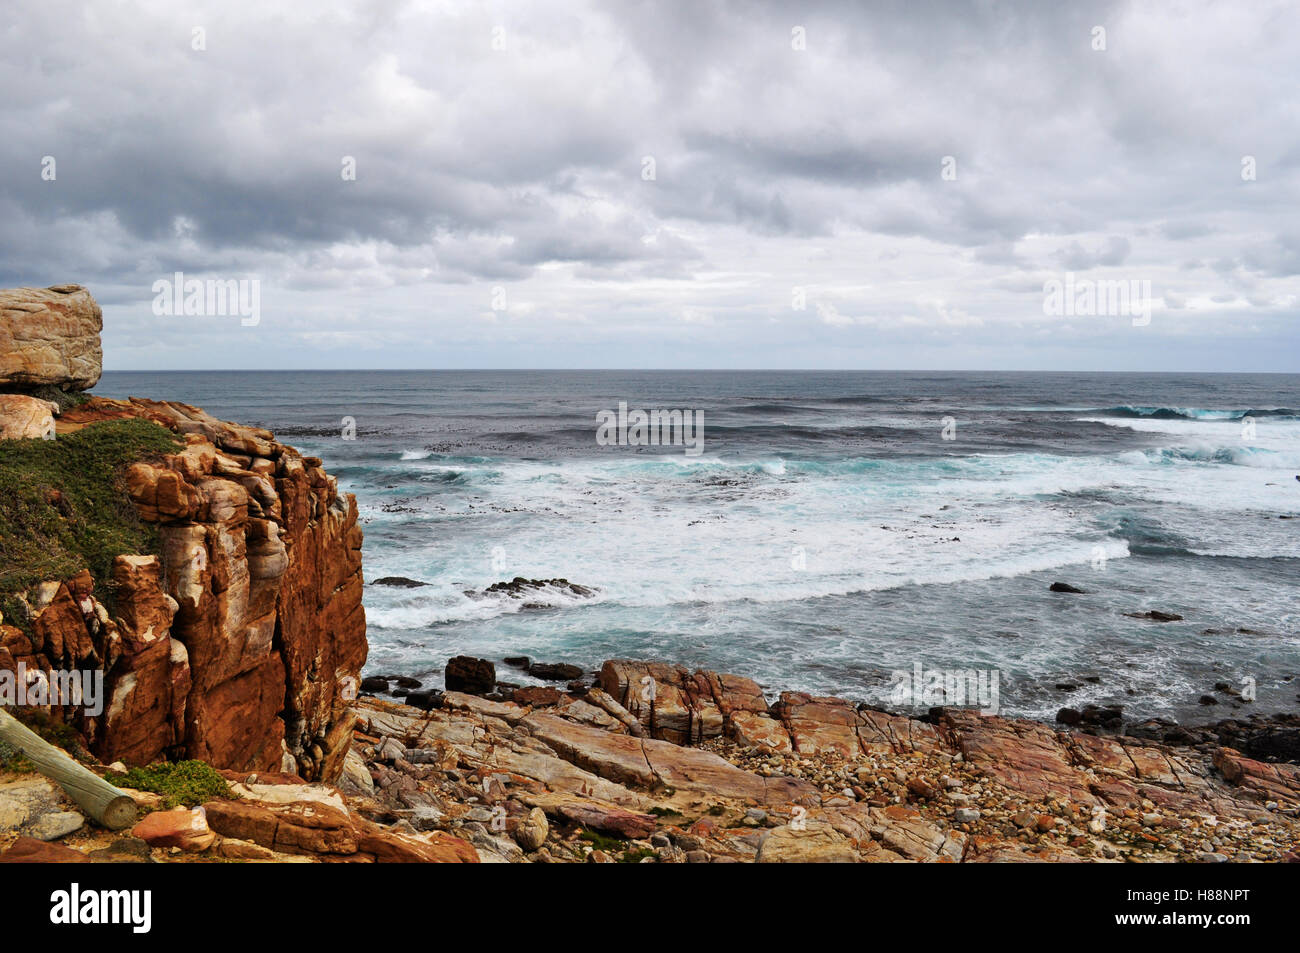 South Africa, driving south: stormy Ocean and weather at the cliff of Cape of Good Hope, rocky headland on the Atlantic coast of the Cape Peninsula Stock Photo